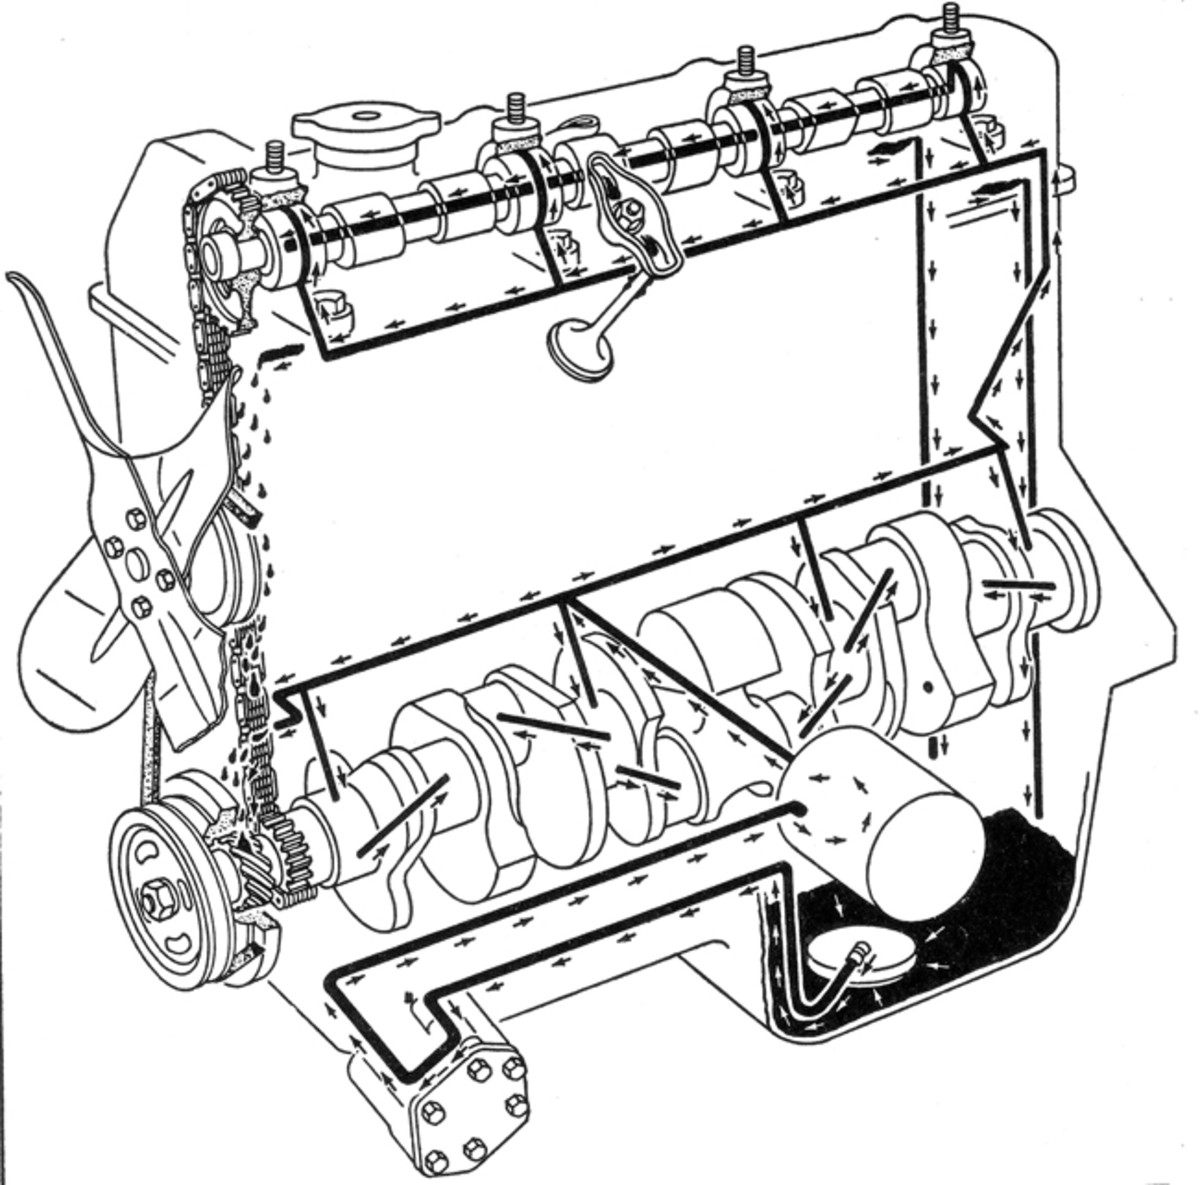  A typical M715 engine with a full-flow, spin-on oil filter, illustrating the lubrication system. A full-flow type filter filters all the engine oil, usually right after it leaves the oil pump under pressure.